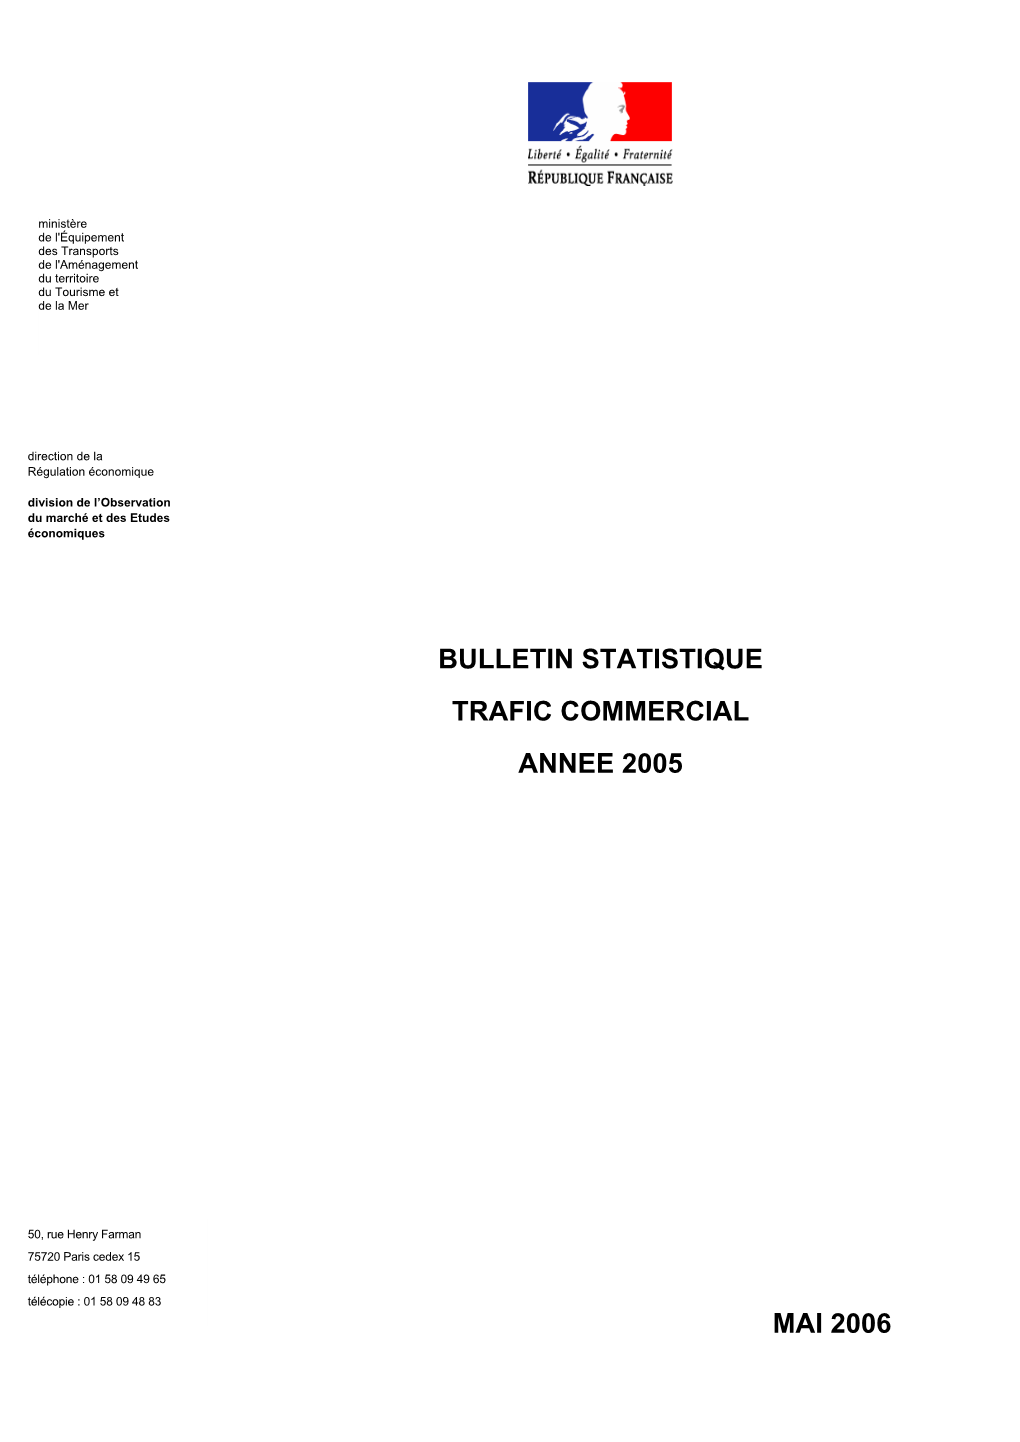 Bulletin Statistique Trafic Commercial Annee 2005